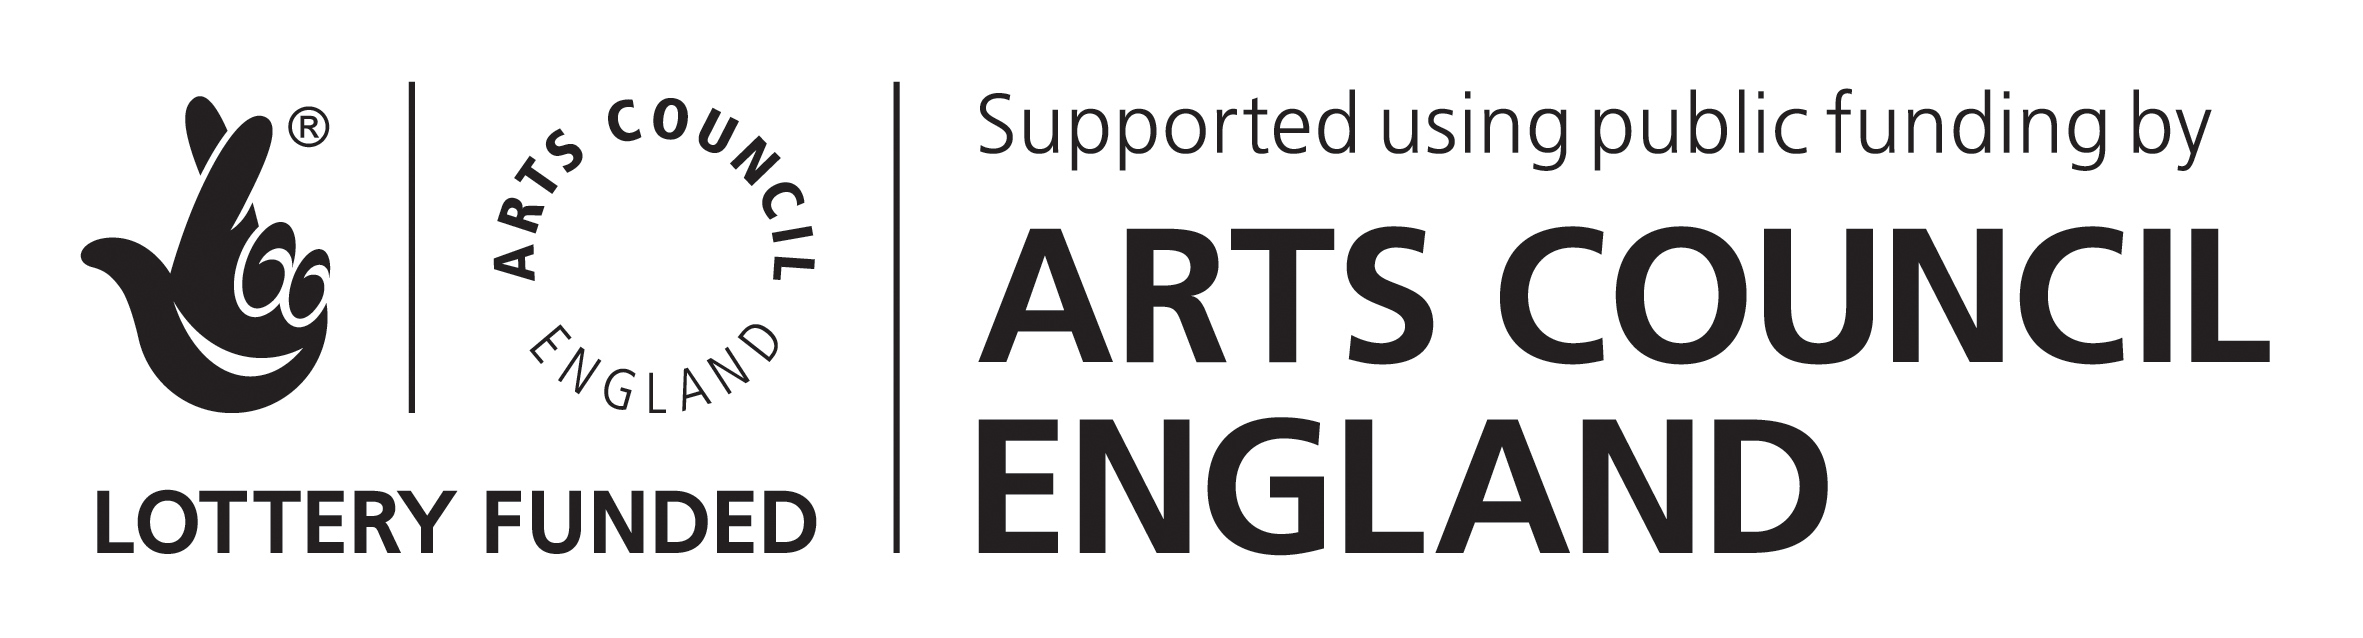 Resting Place is supported using public funding by the National Lottery through Arts Council England.